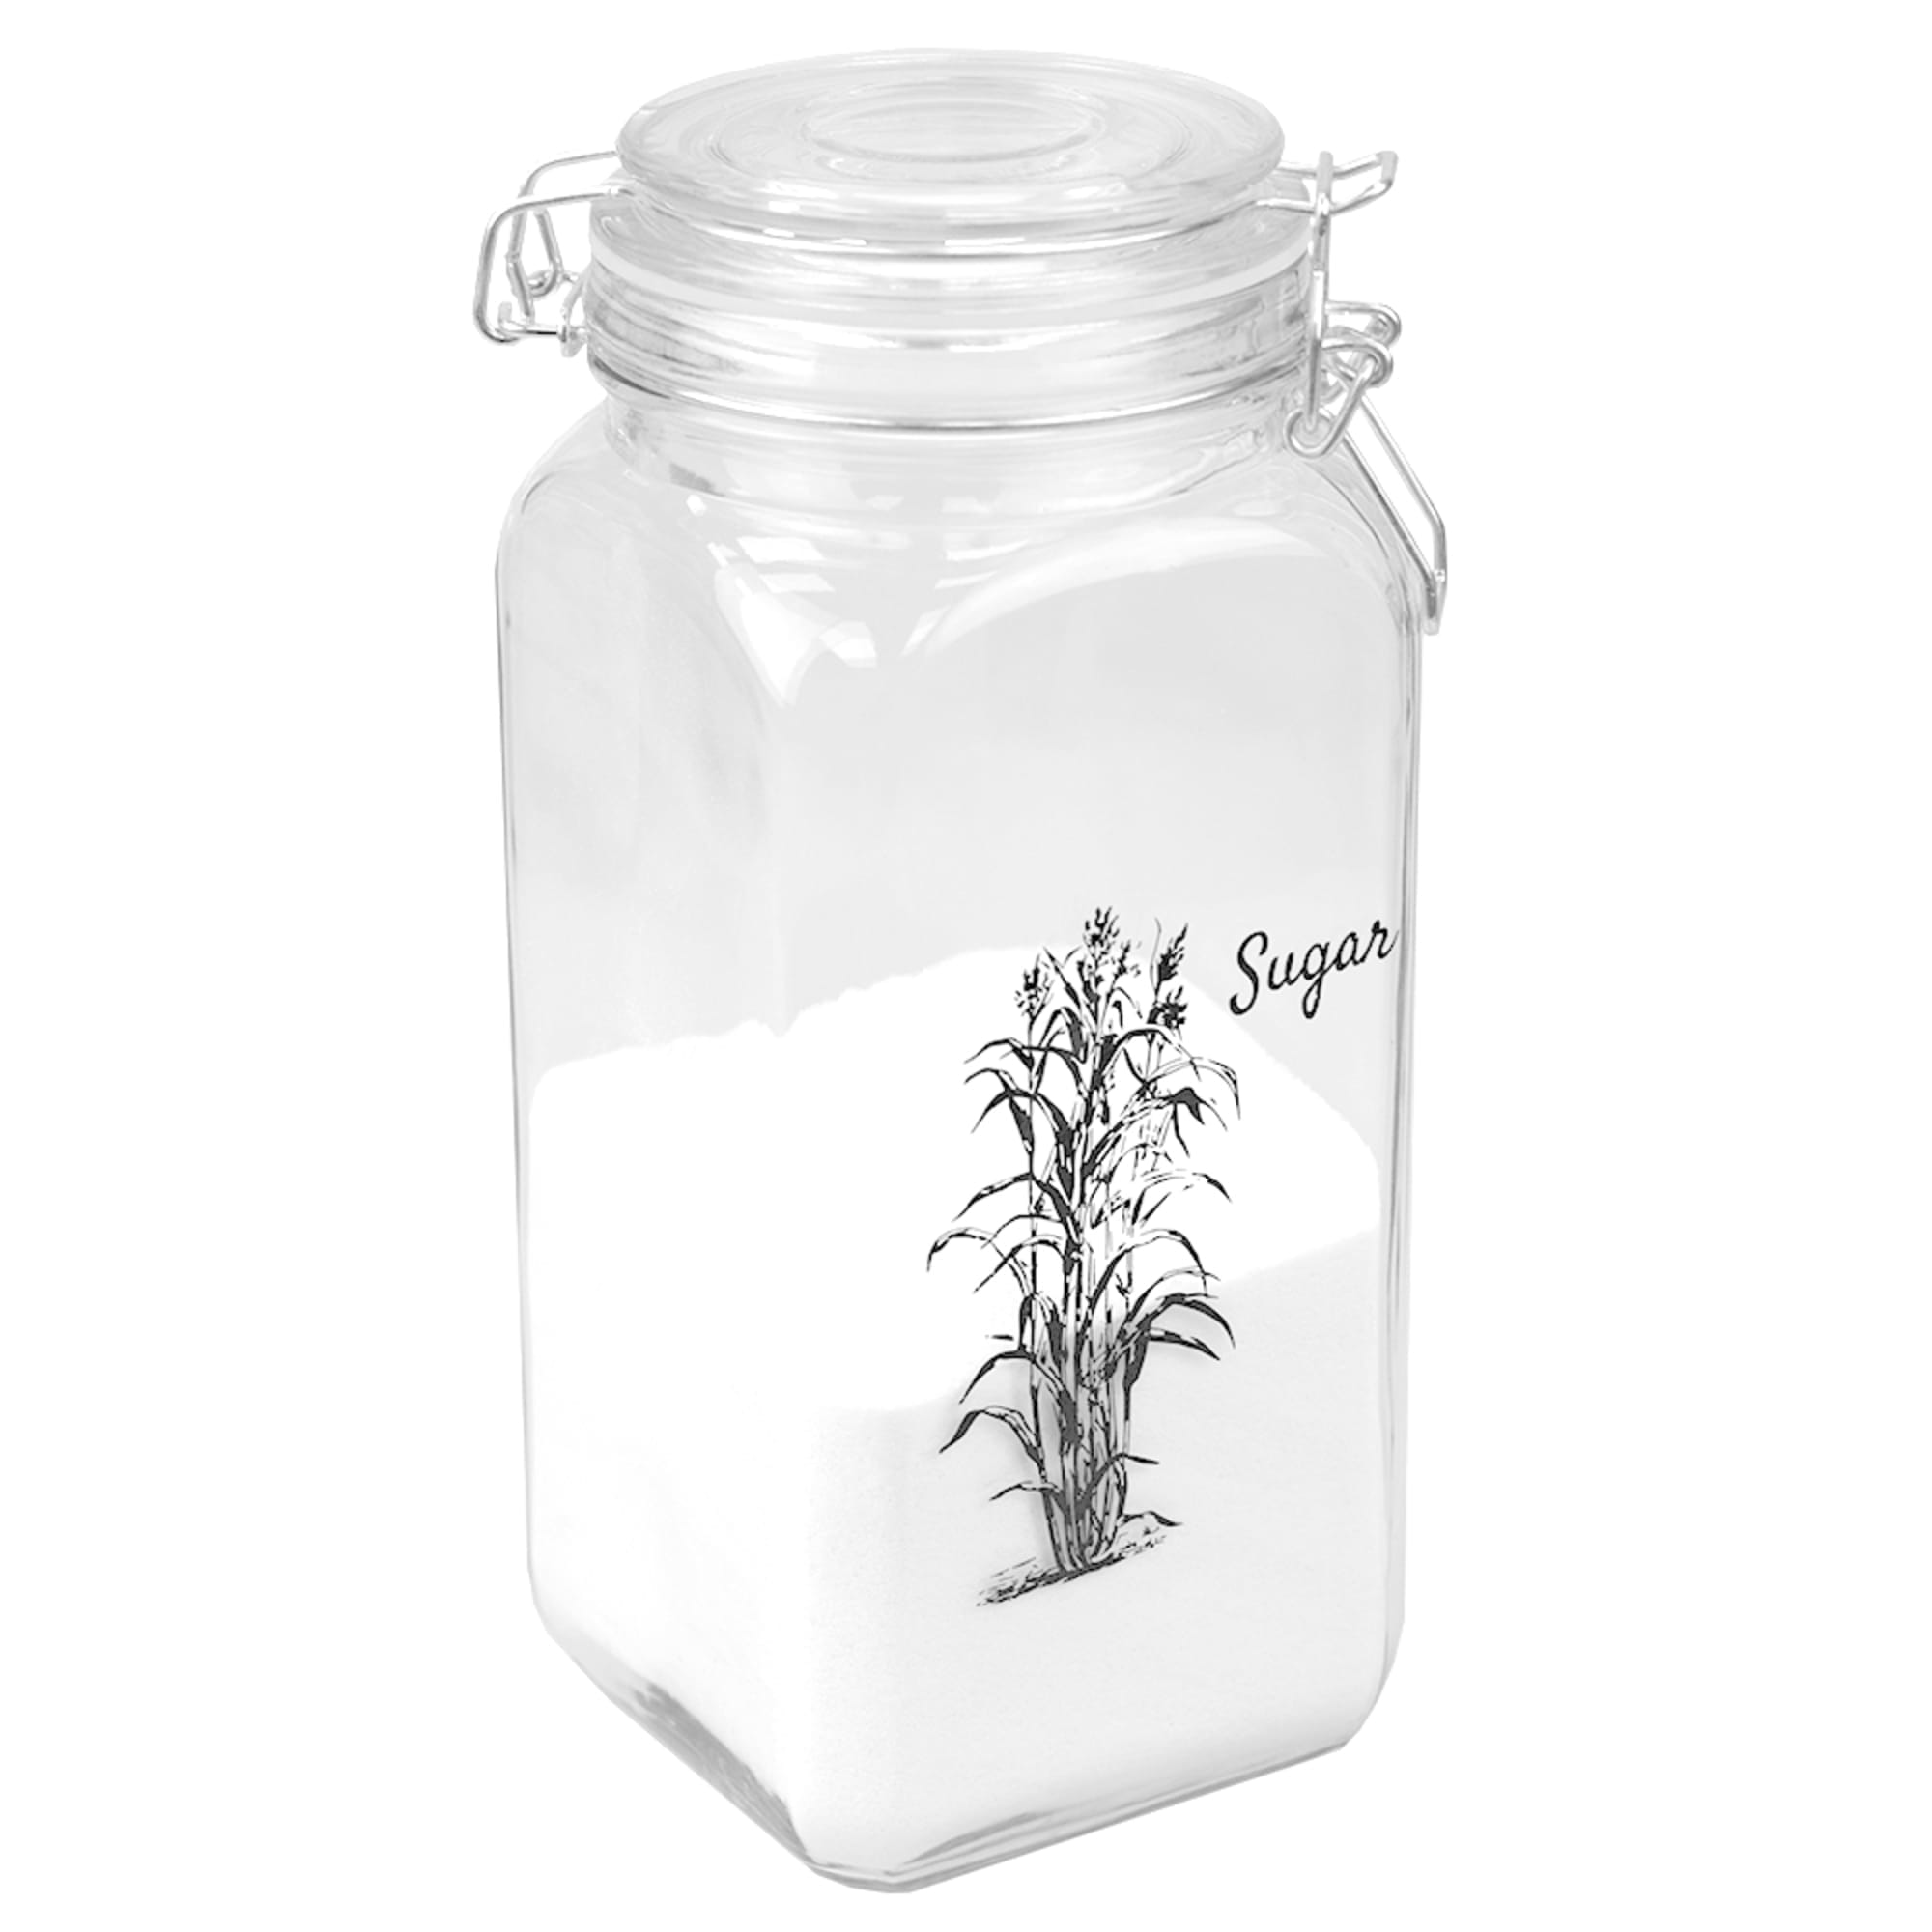 Home Basics Ludlow 53 oz. Glass Canister with Metal Clasp, Clear $6.00 EACH, CASE PACK OF 12